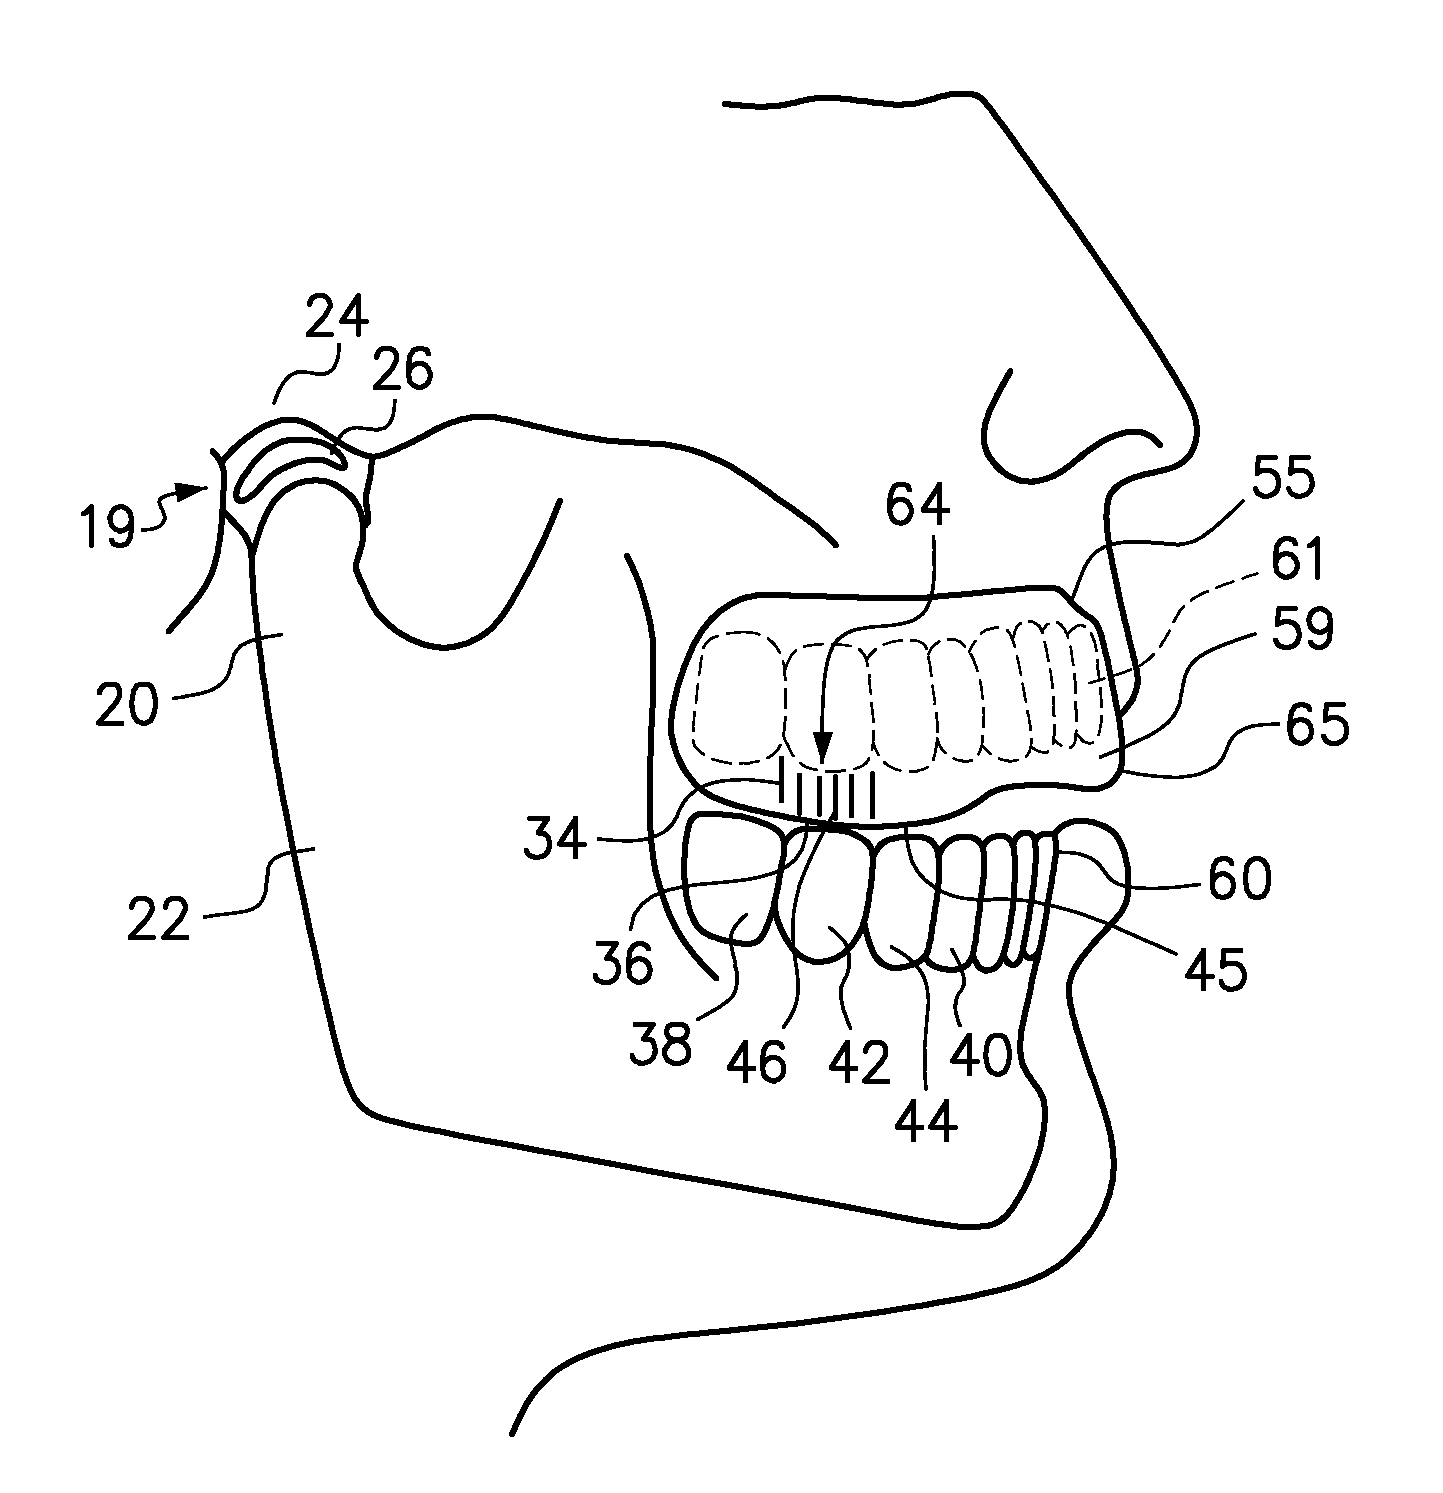 Mouthguard and method of manufacture therefor